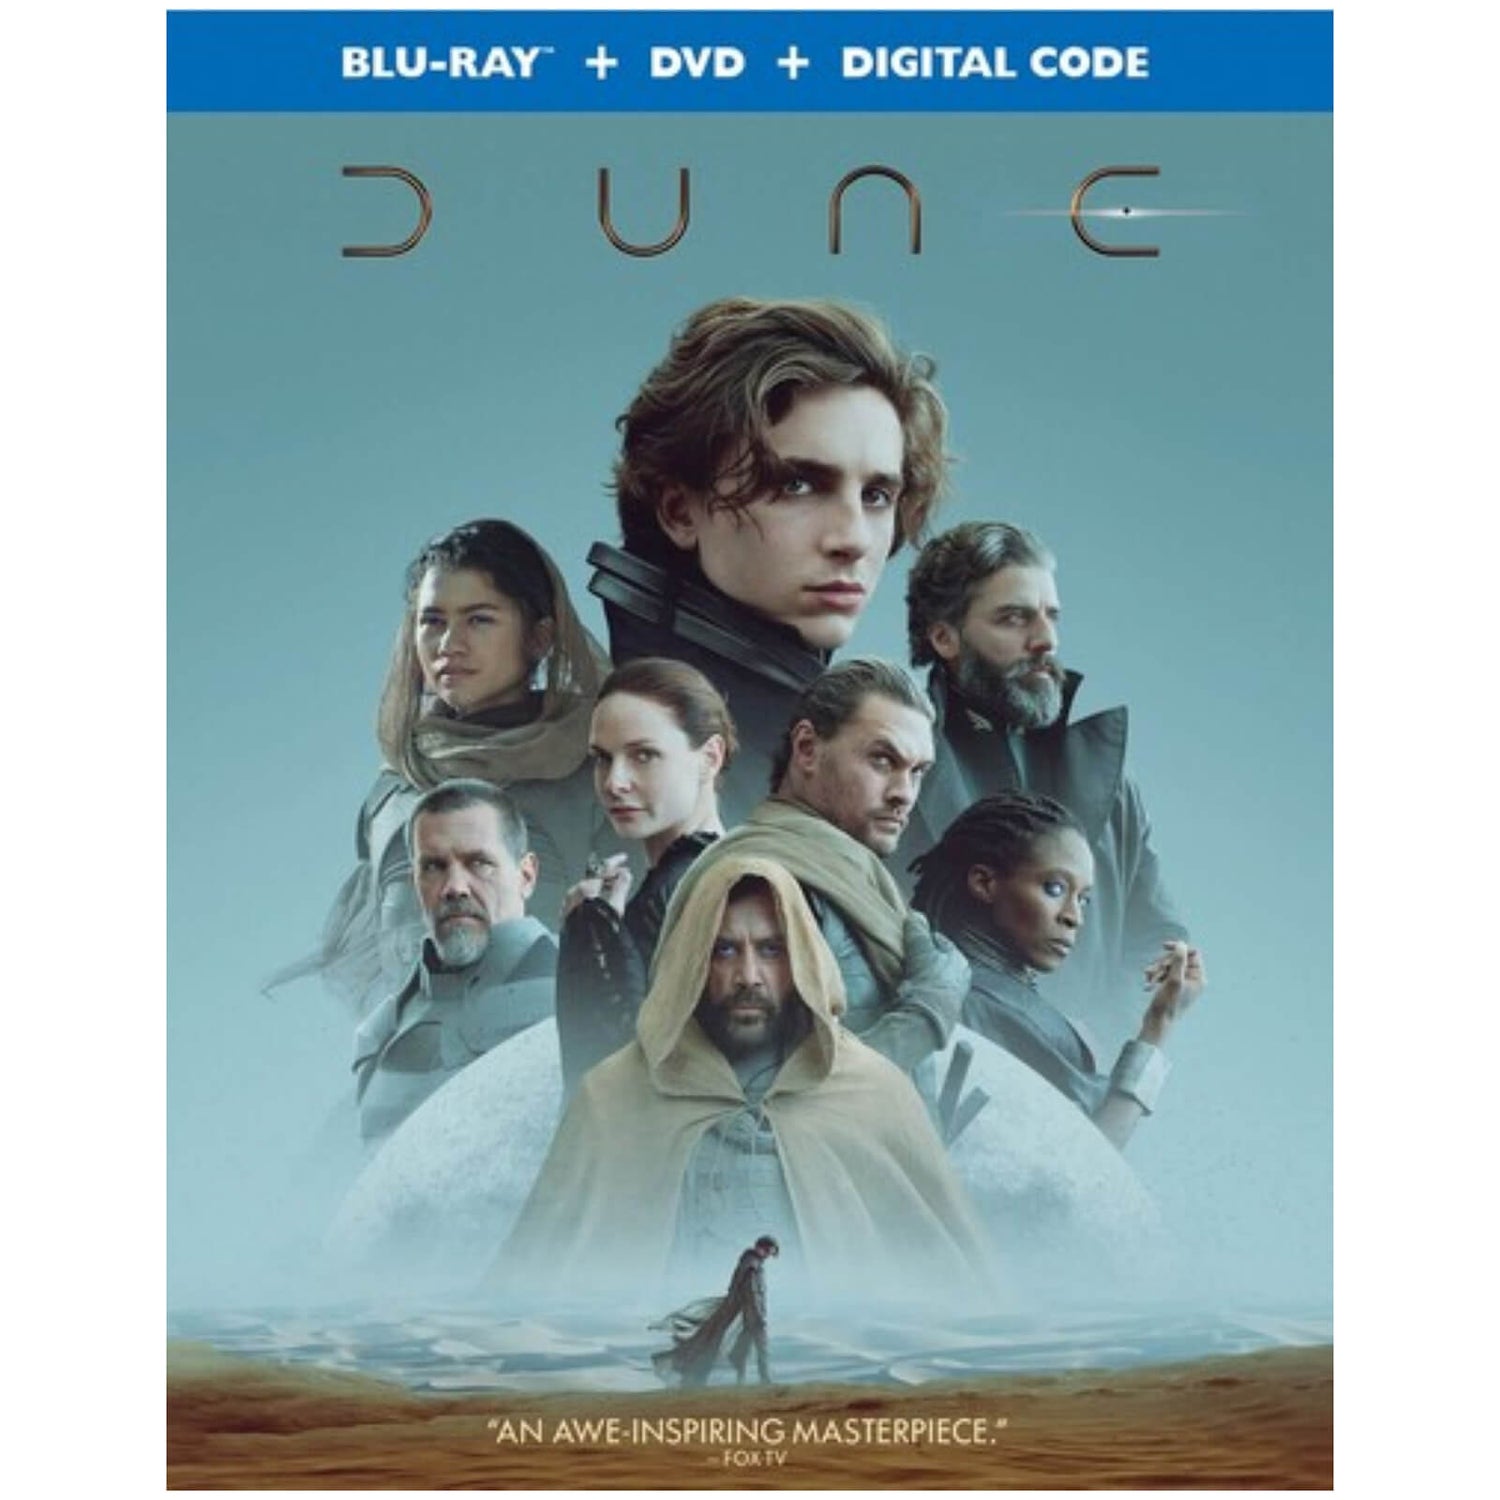 Dune (Includes DVD)